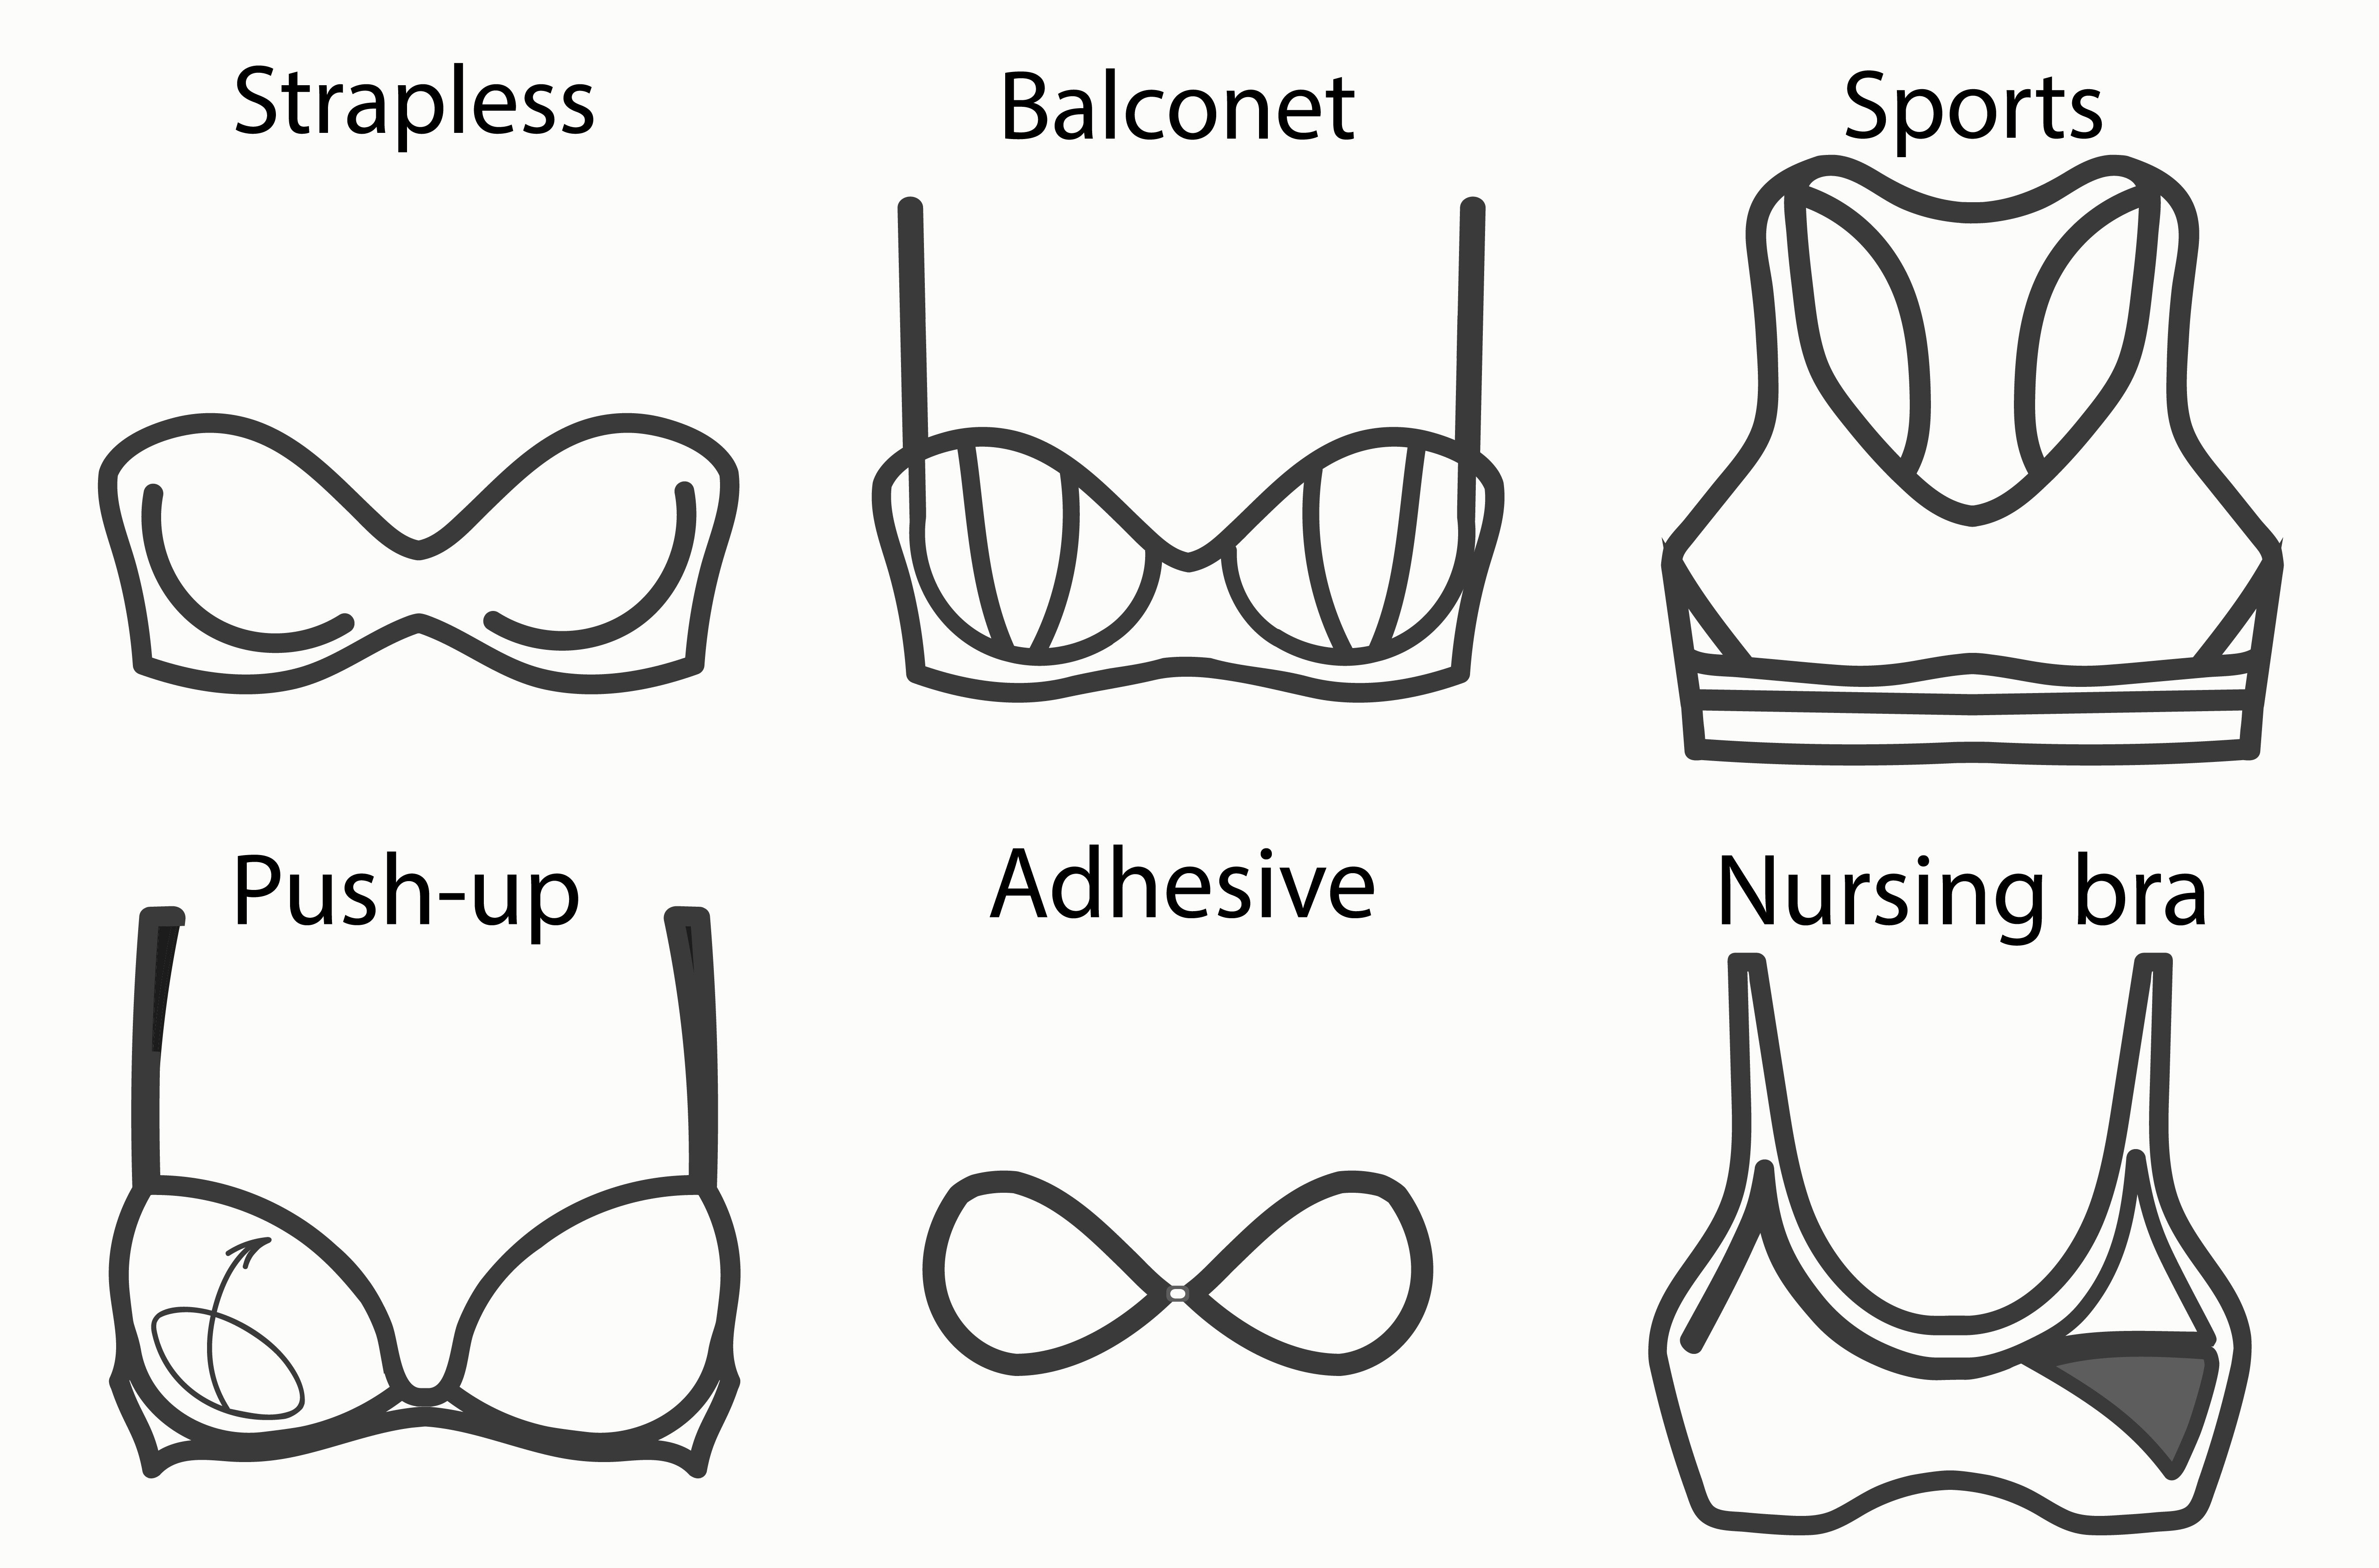 From Strapless To Minimisers: 10 Types Of Bras Every Woman